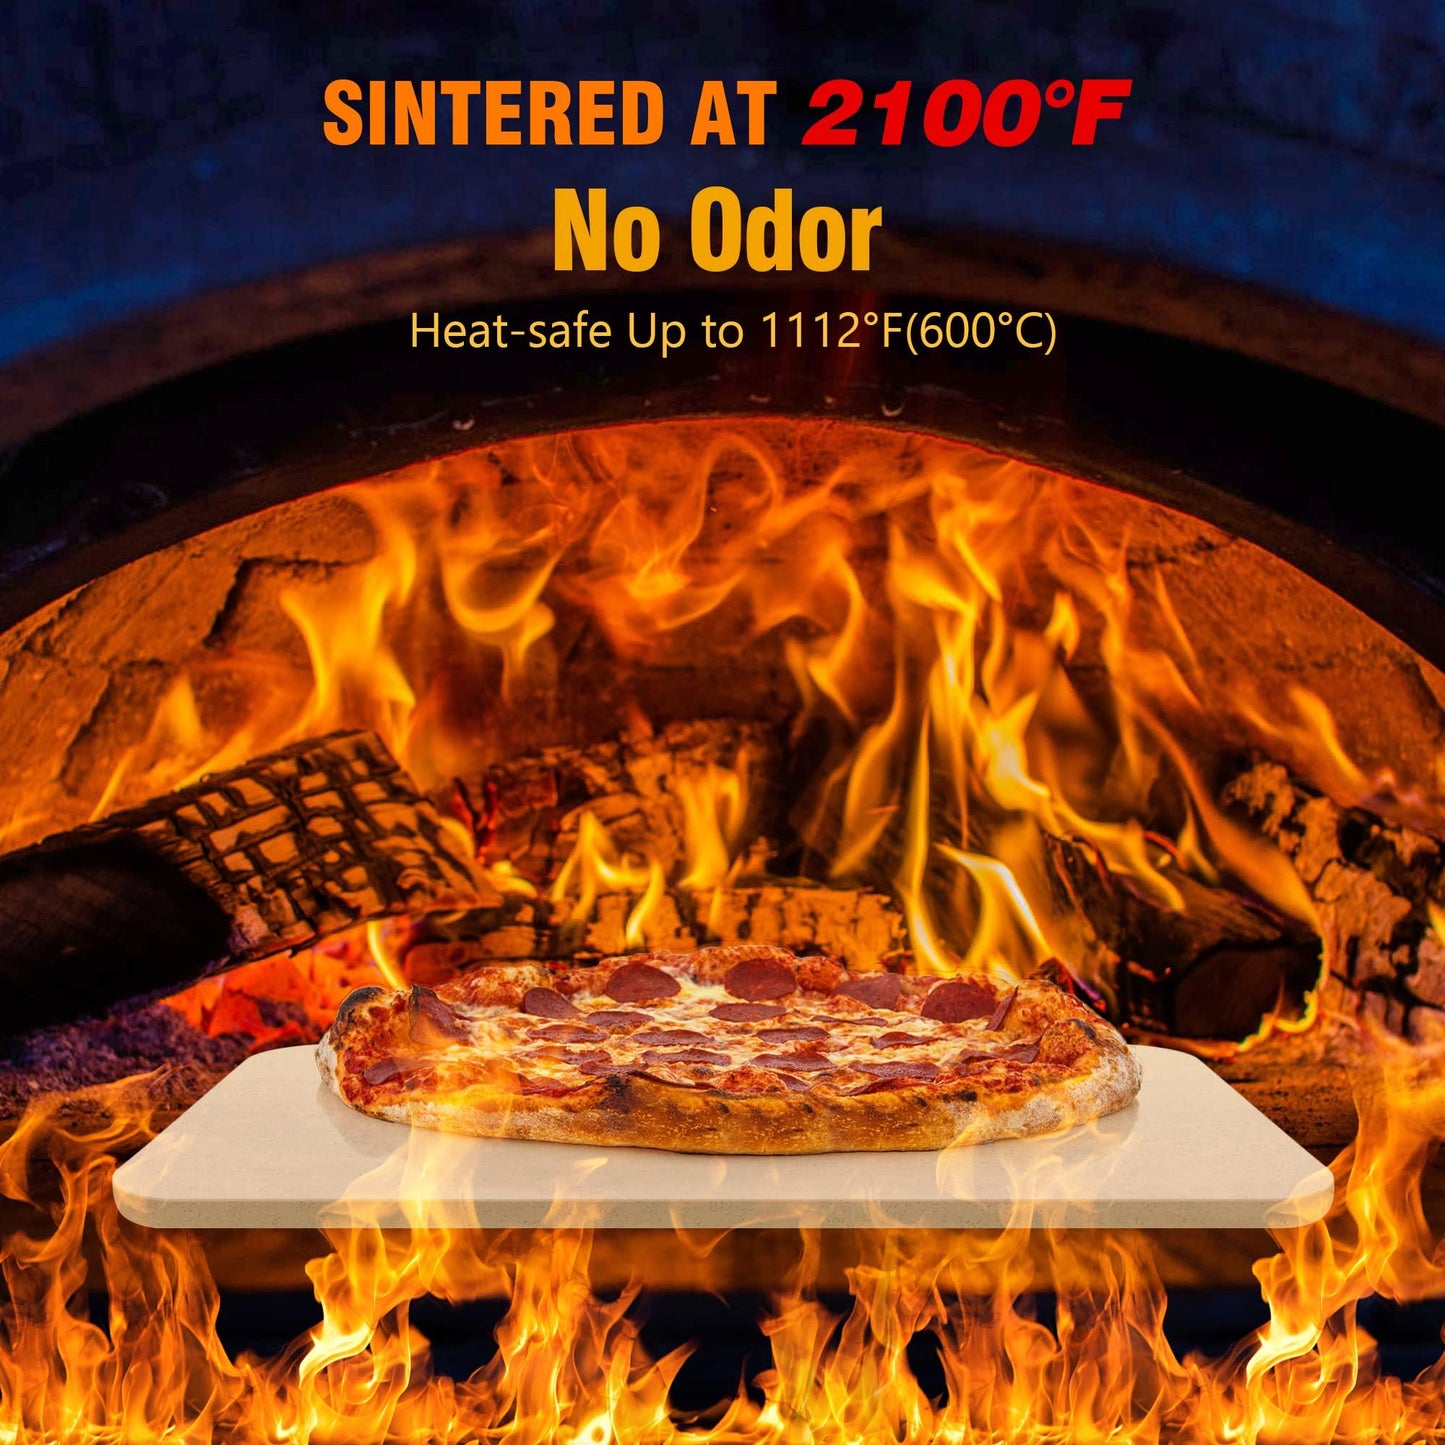 KORCCI Pizza Stone15 x 12", Large Pizza Stone for Oven and Grill, Free Pizza Peel paddle, Durable and Safe Baking Stone, Thermal Shock Resistant Cooking Stone - CookCave